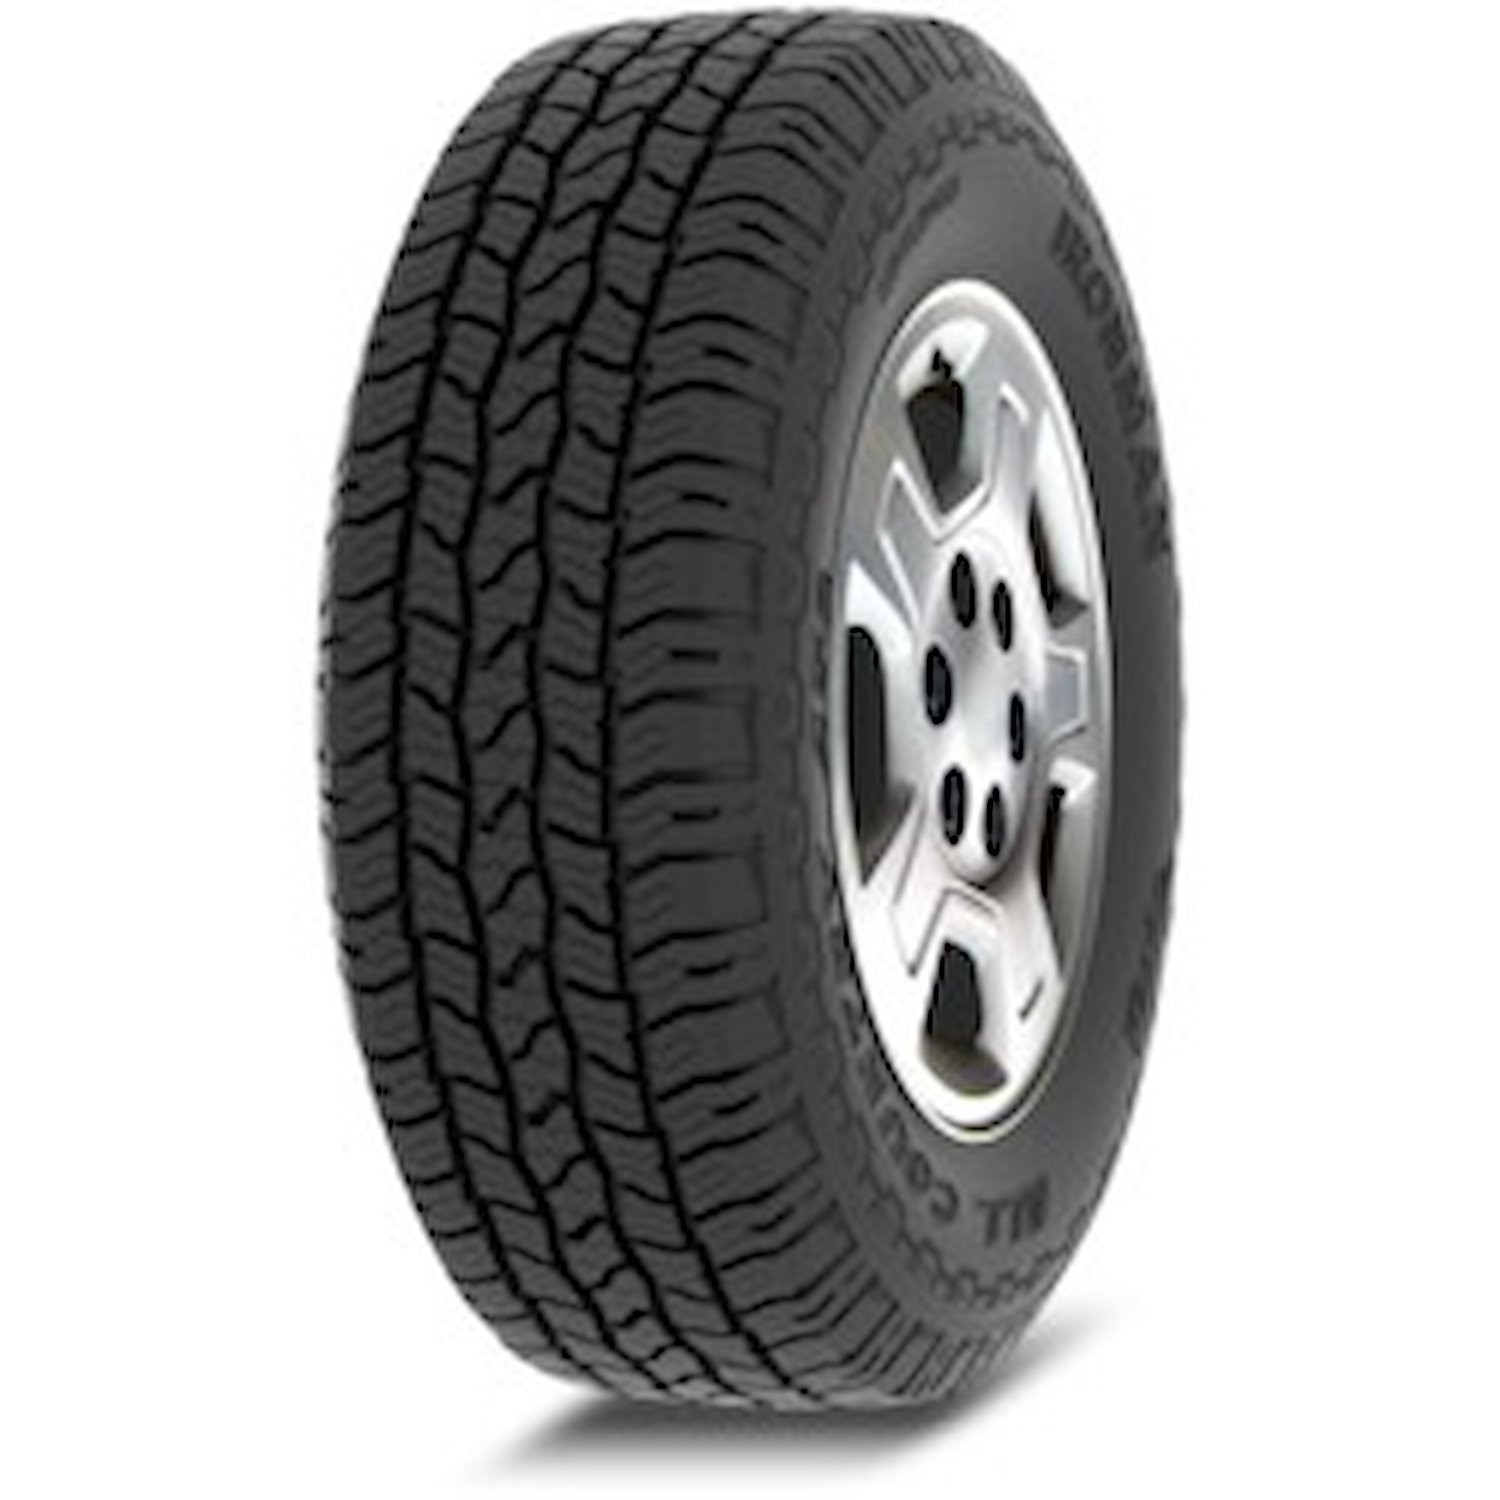 07646 All Country AT2 Tire, LT225/75R16, 115/112R